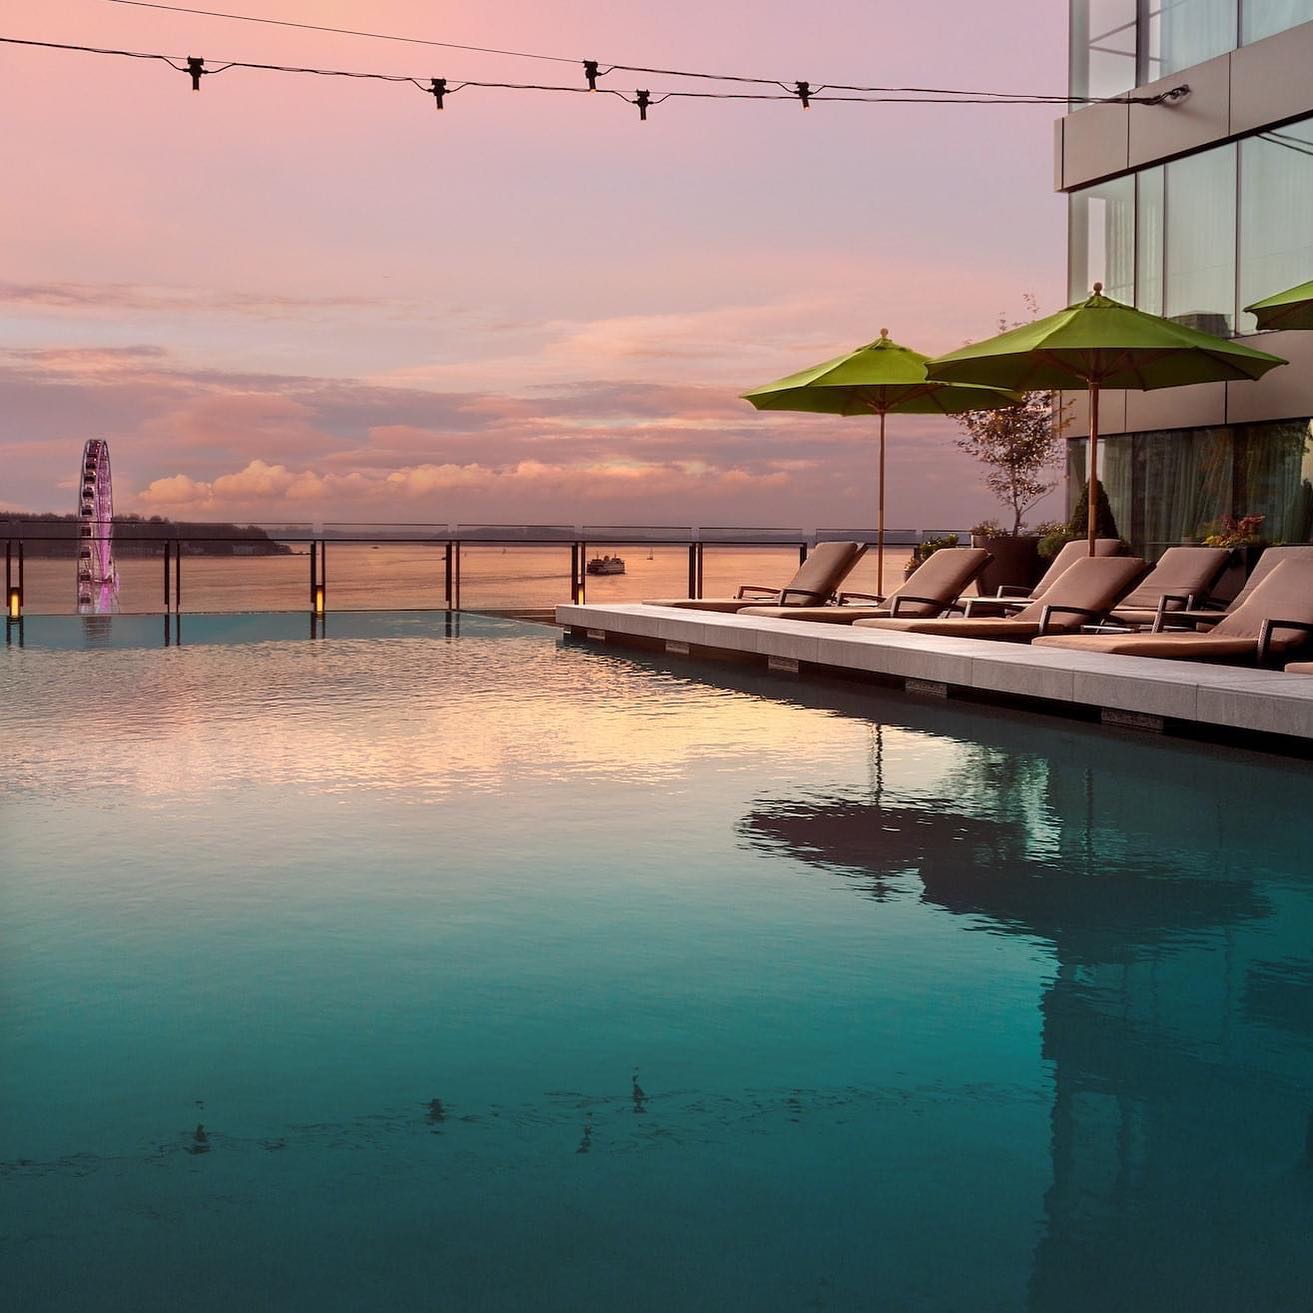 Best Hotel Pools in Washington 😎 Washington might have a reputation for outdoor adventure—but if you’re looking for a more relaxing place to unwind, look no further than the state’s wide selection of luxe resorts and accompanying pool spaces. From upscale hotels to boutique lodges, these are the best hotel pools in Washington for lounging and lapping it up this summer. Check out the list at FabulousWashington.com. 
📸: @fsseattle